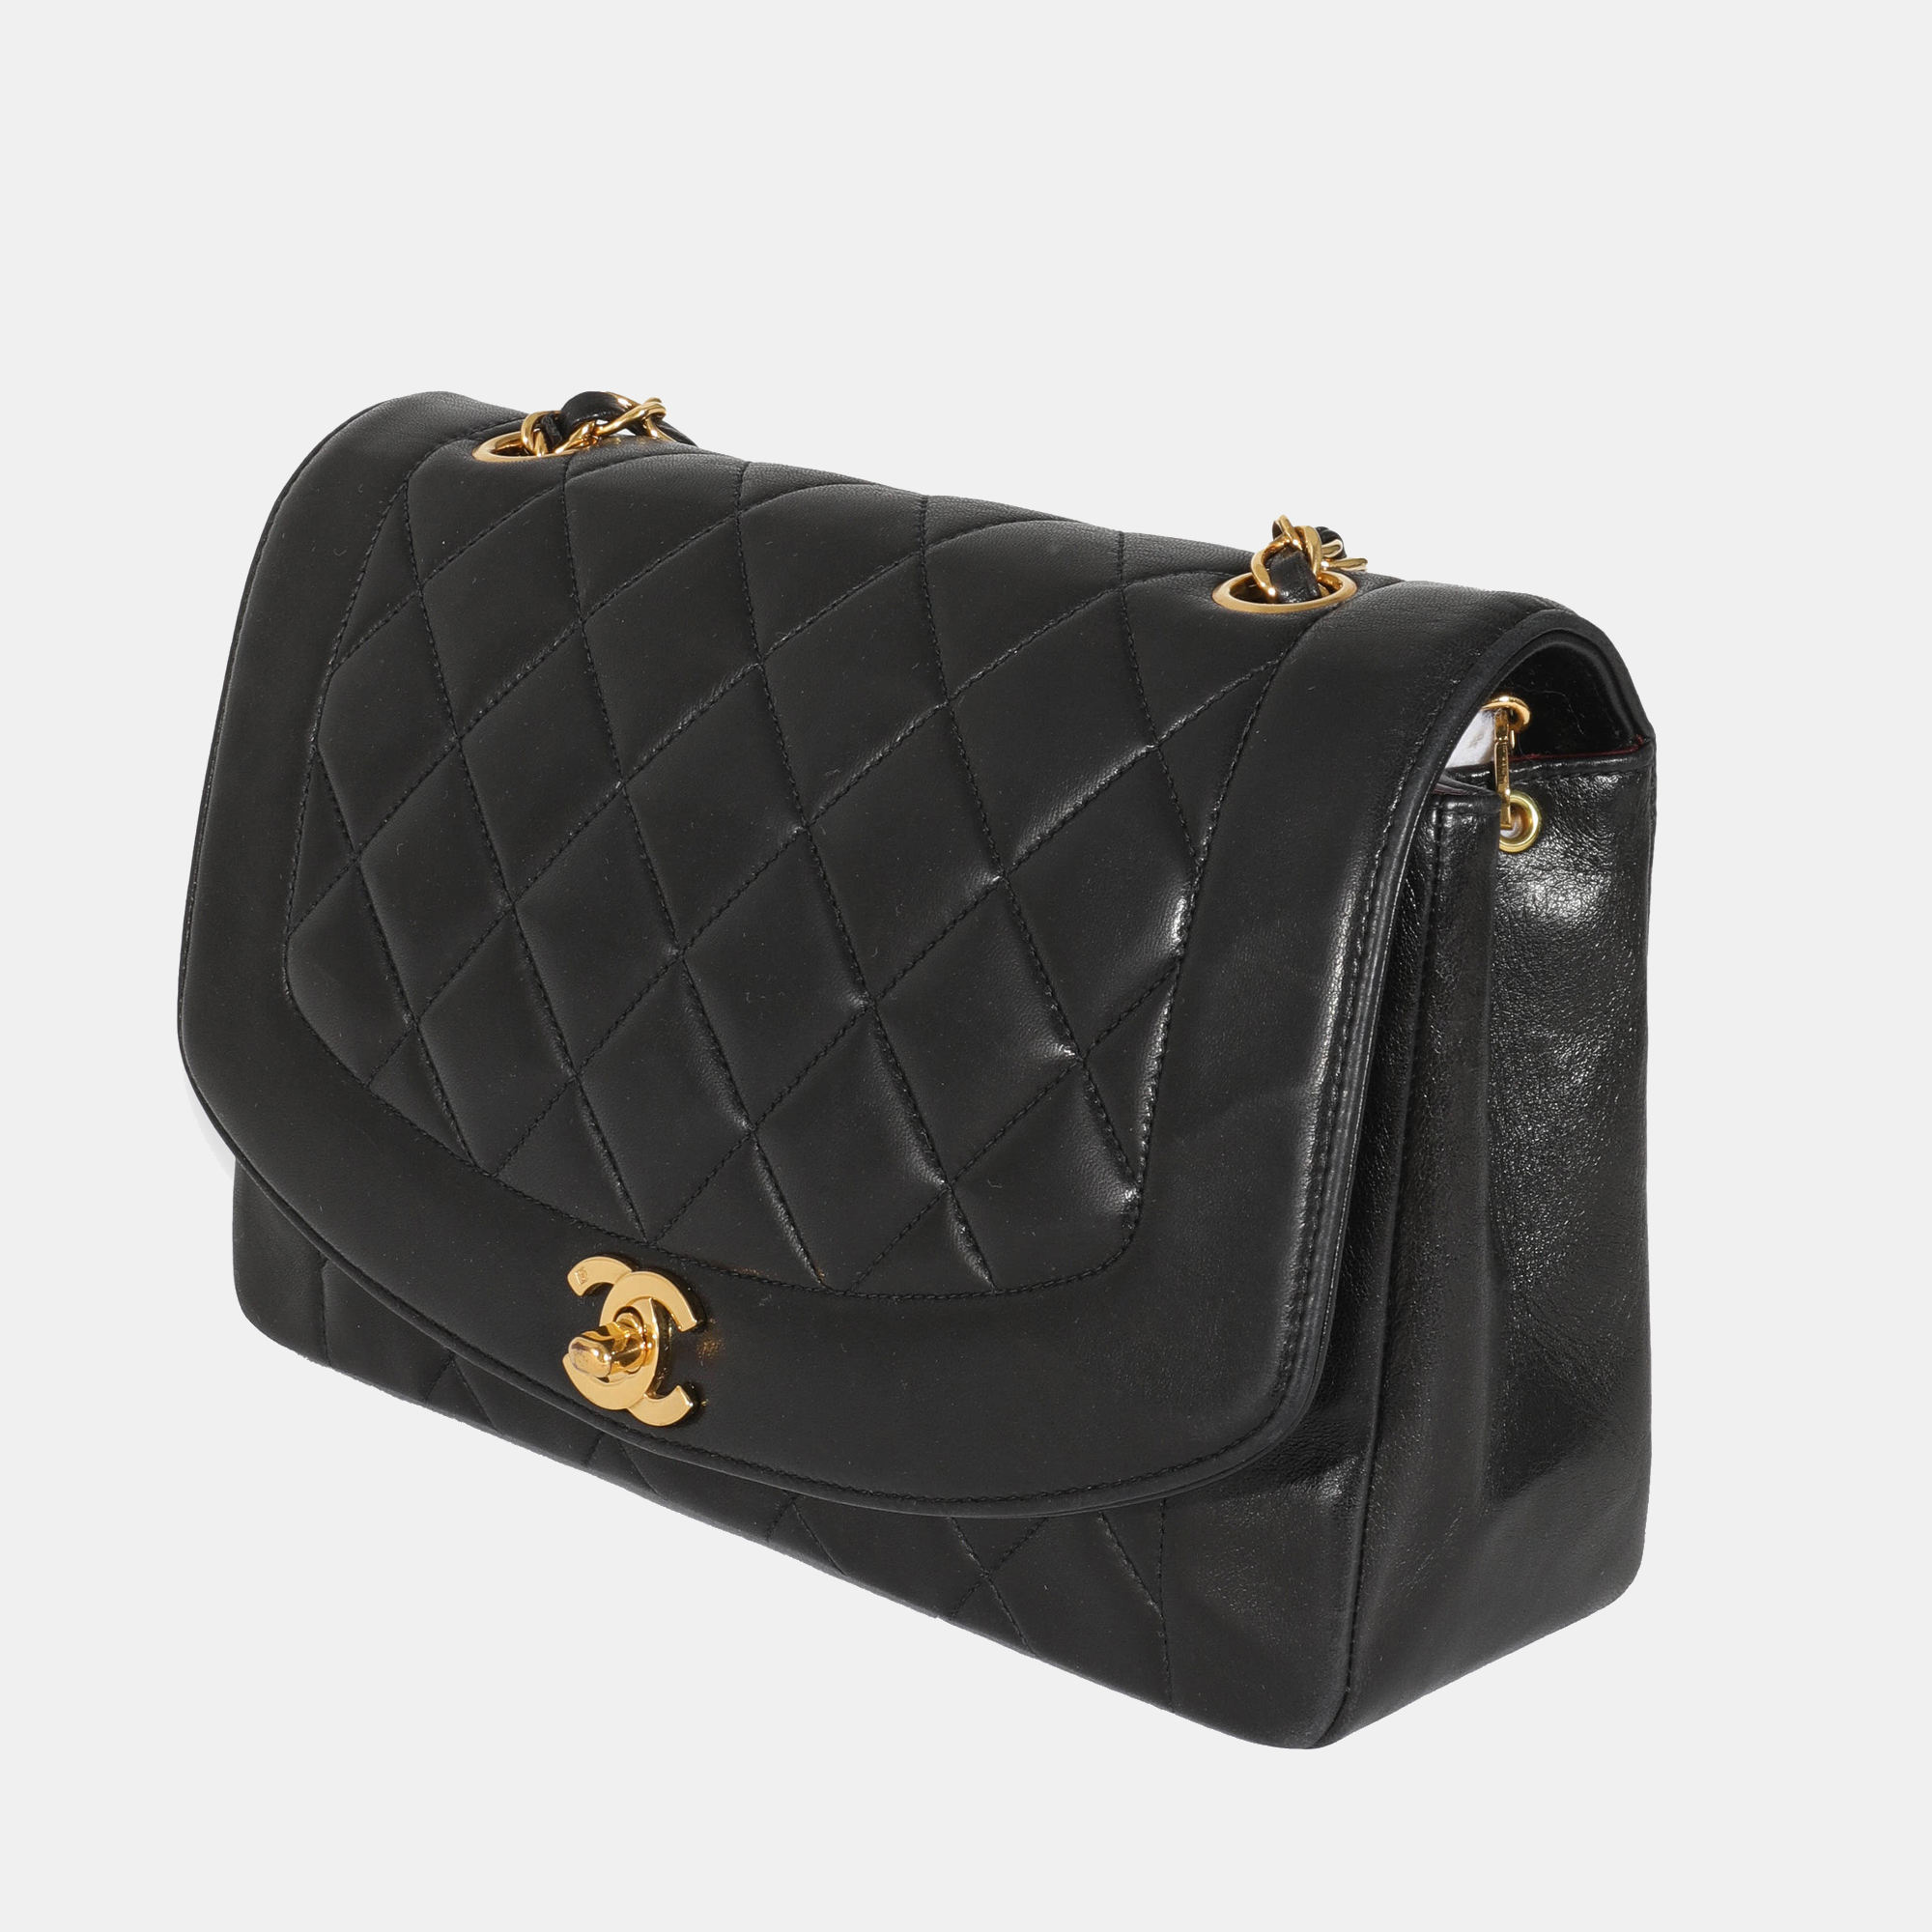 Chanel Vintage Black Quilted Lambskin Diana Flap Bag price in